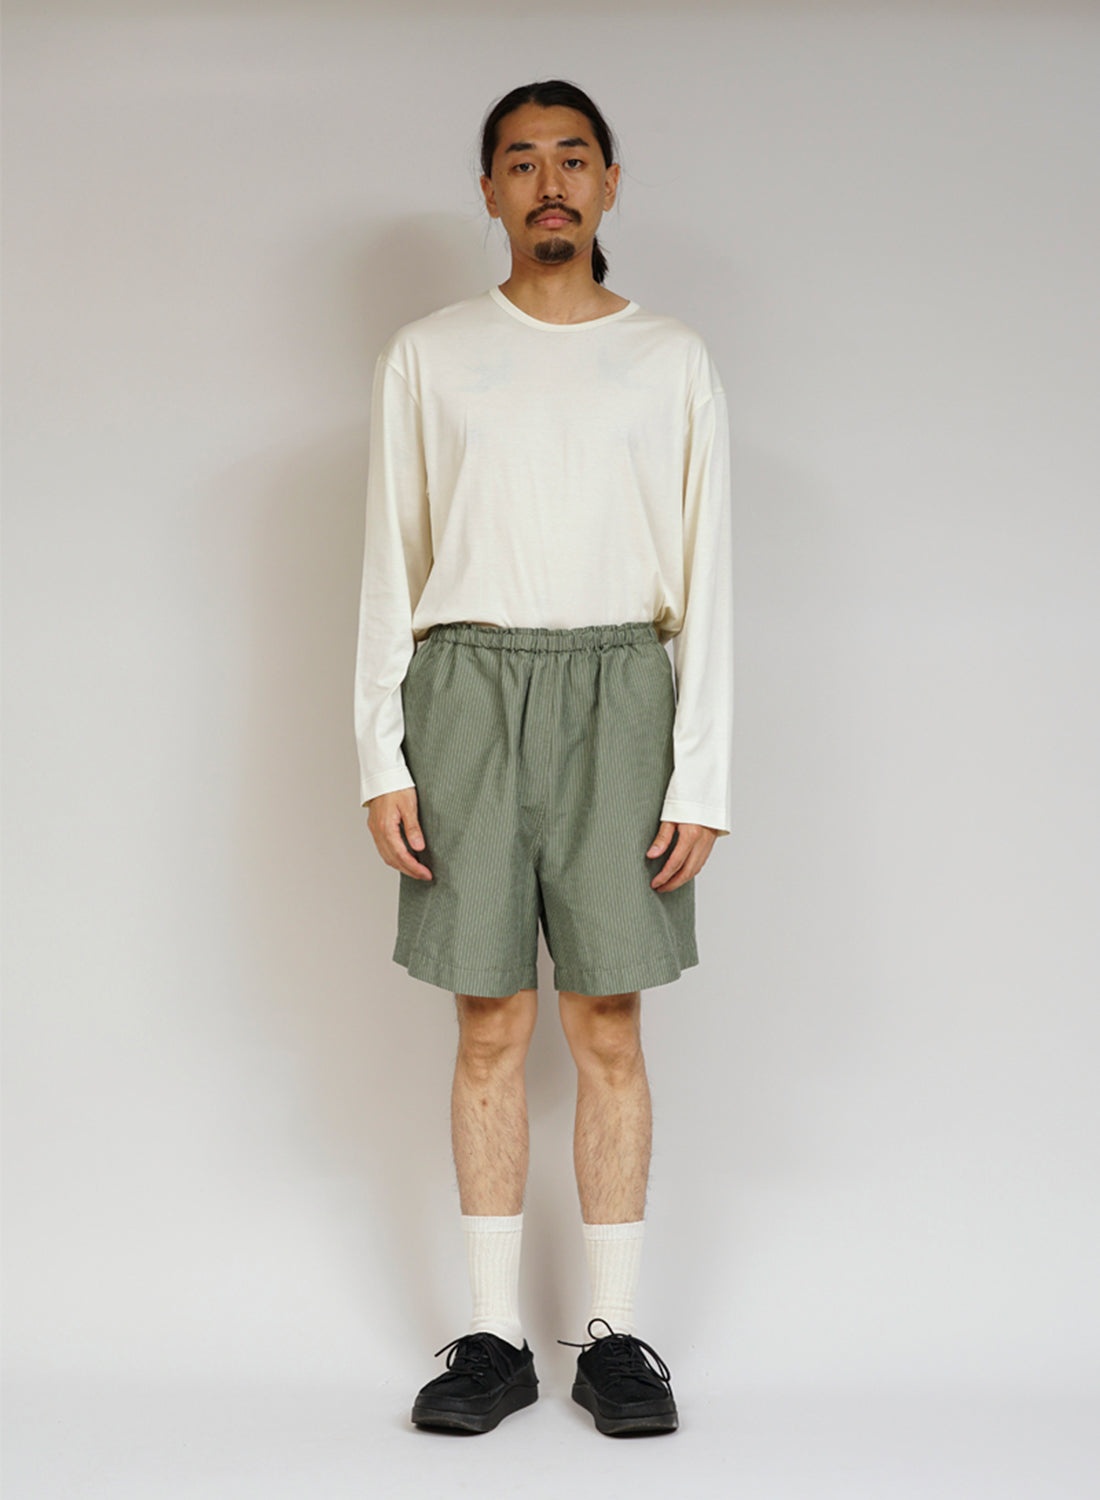 Nigel Cabourn x Sunspel Ripstop Army Short in Army Green - 2